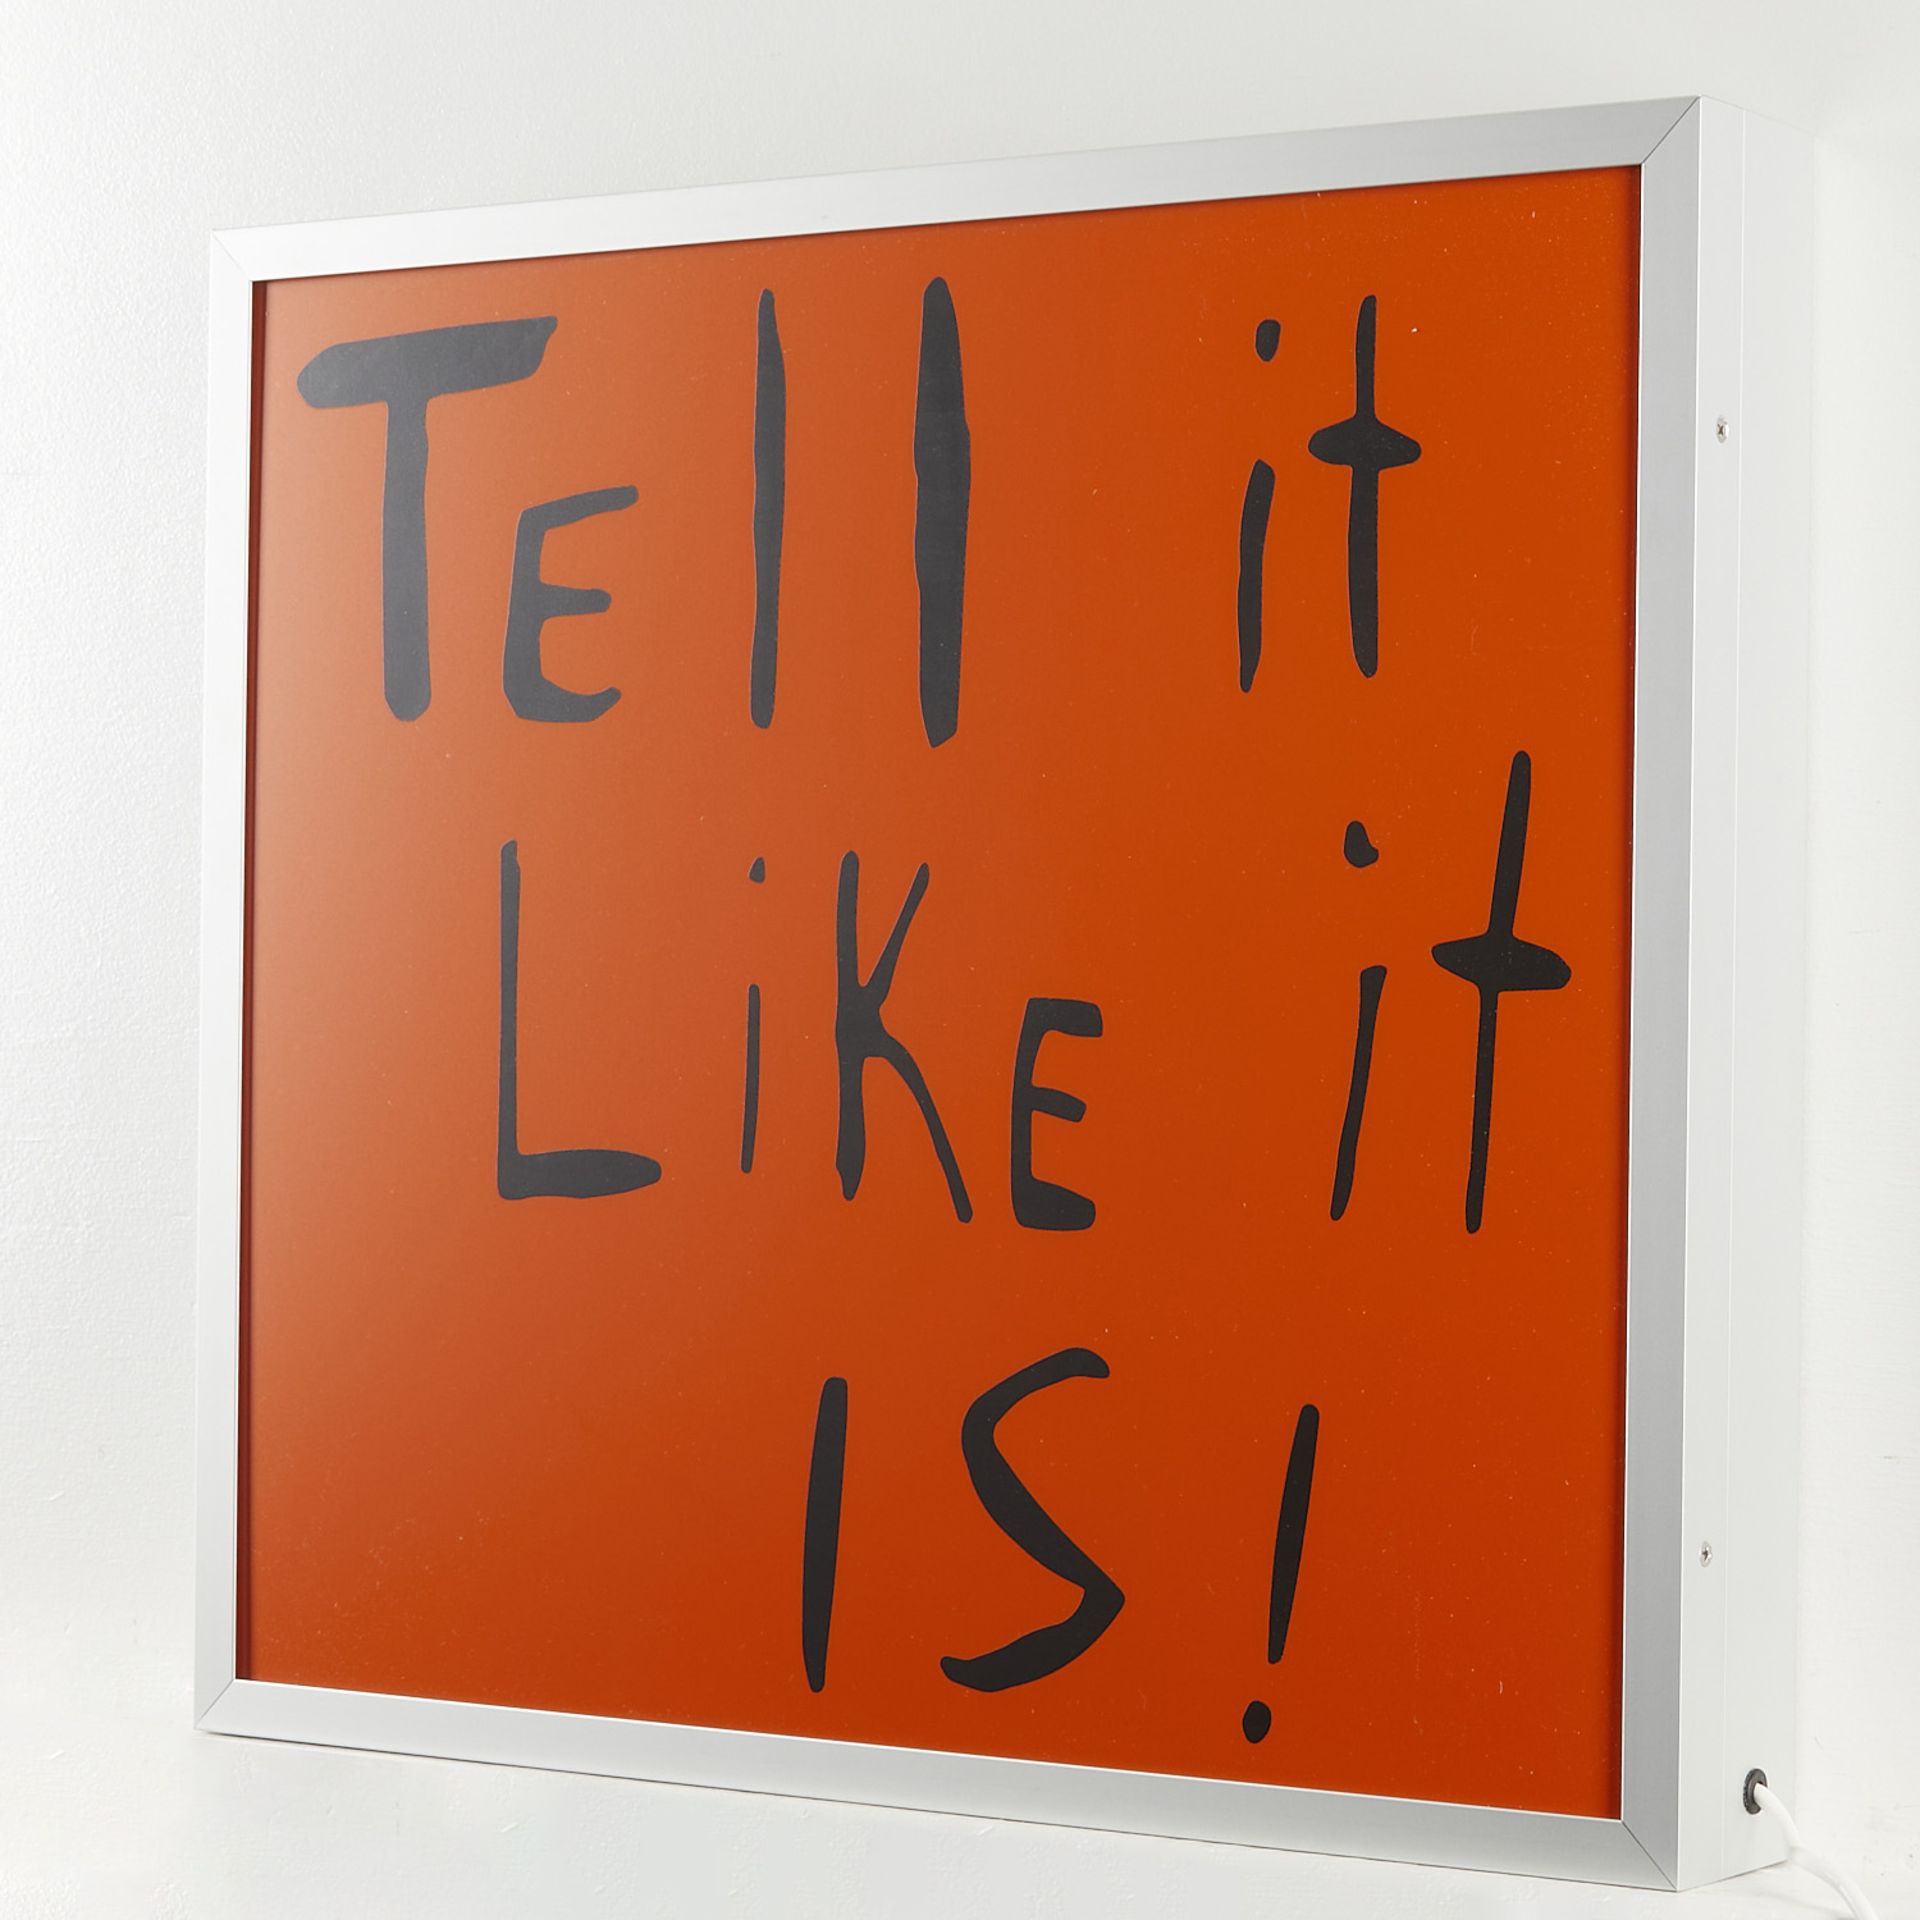 Sam Durant "Tell It Like It Is" Electric Sign 2020 - Image 8 of 11